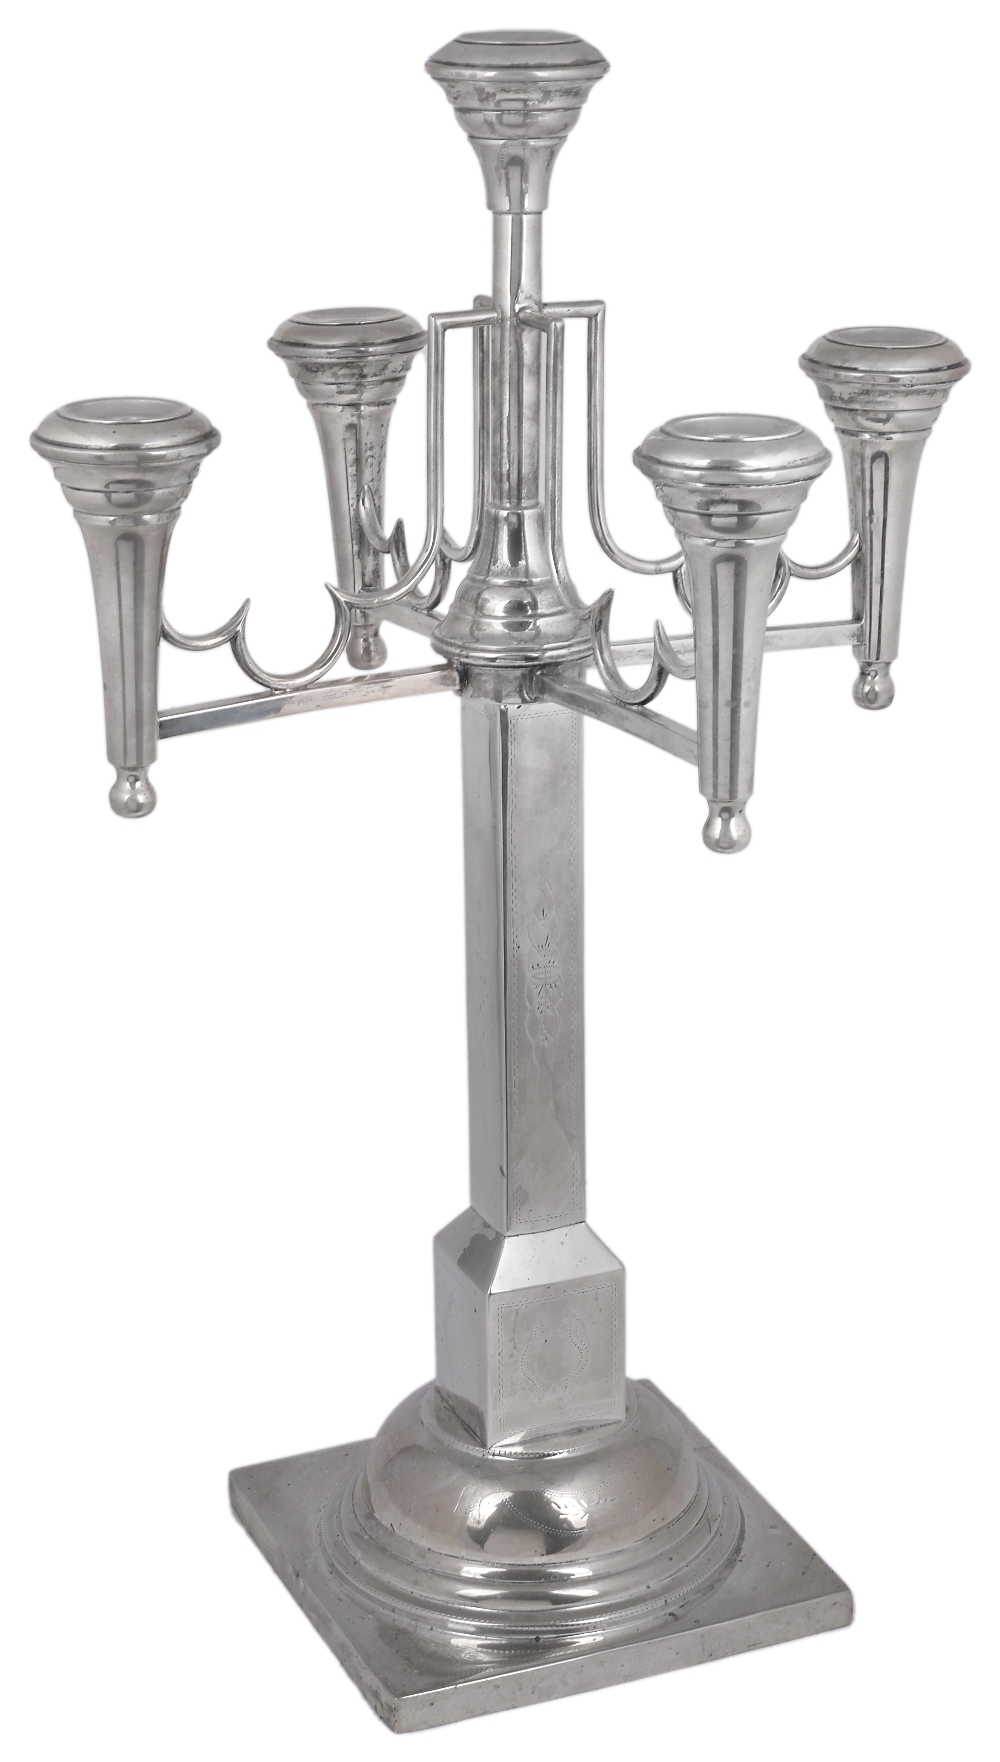 A POLISH SILVER FIVE-LIGHT CANDELABRUM, MAKER'S MARK JS, CRACOW, 1920s wrigglework borders and